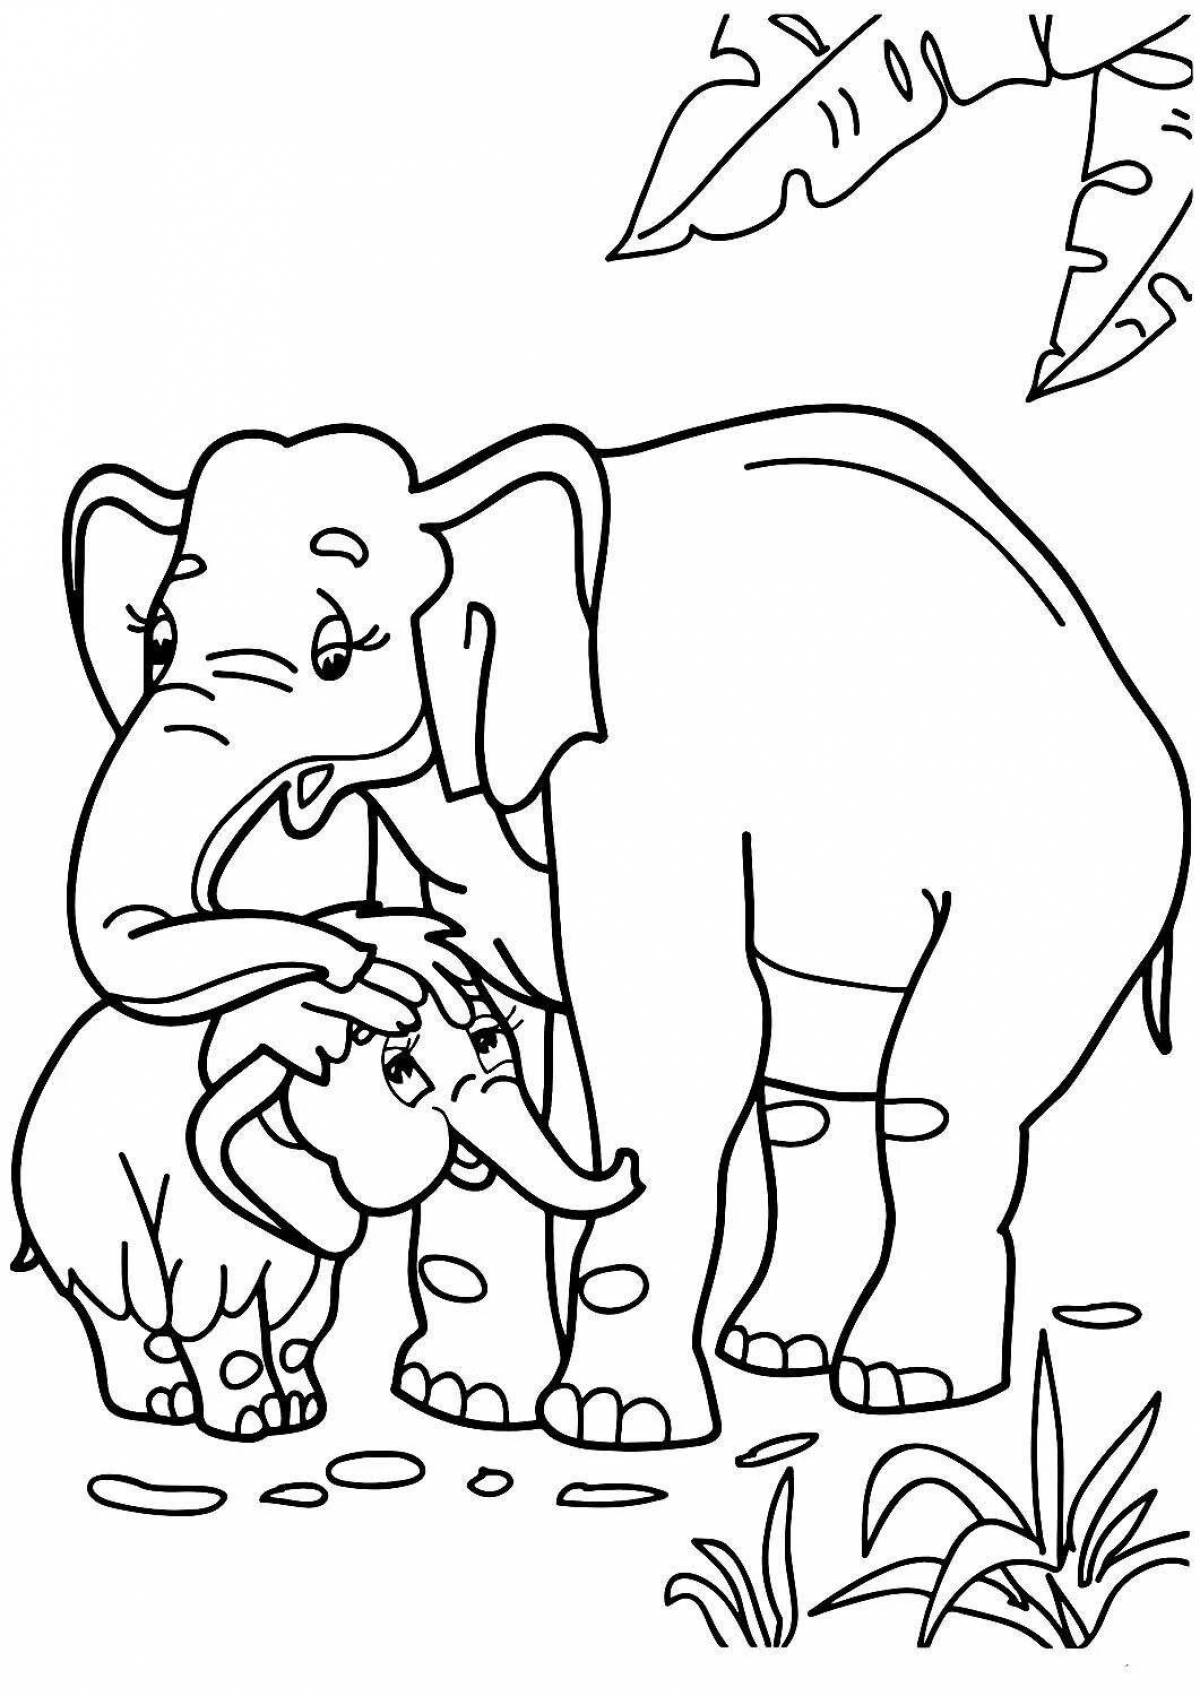 Fun coloring mammoth for kids